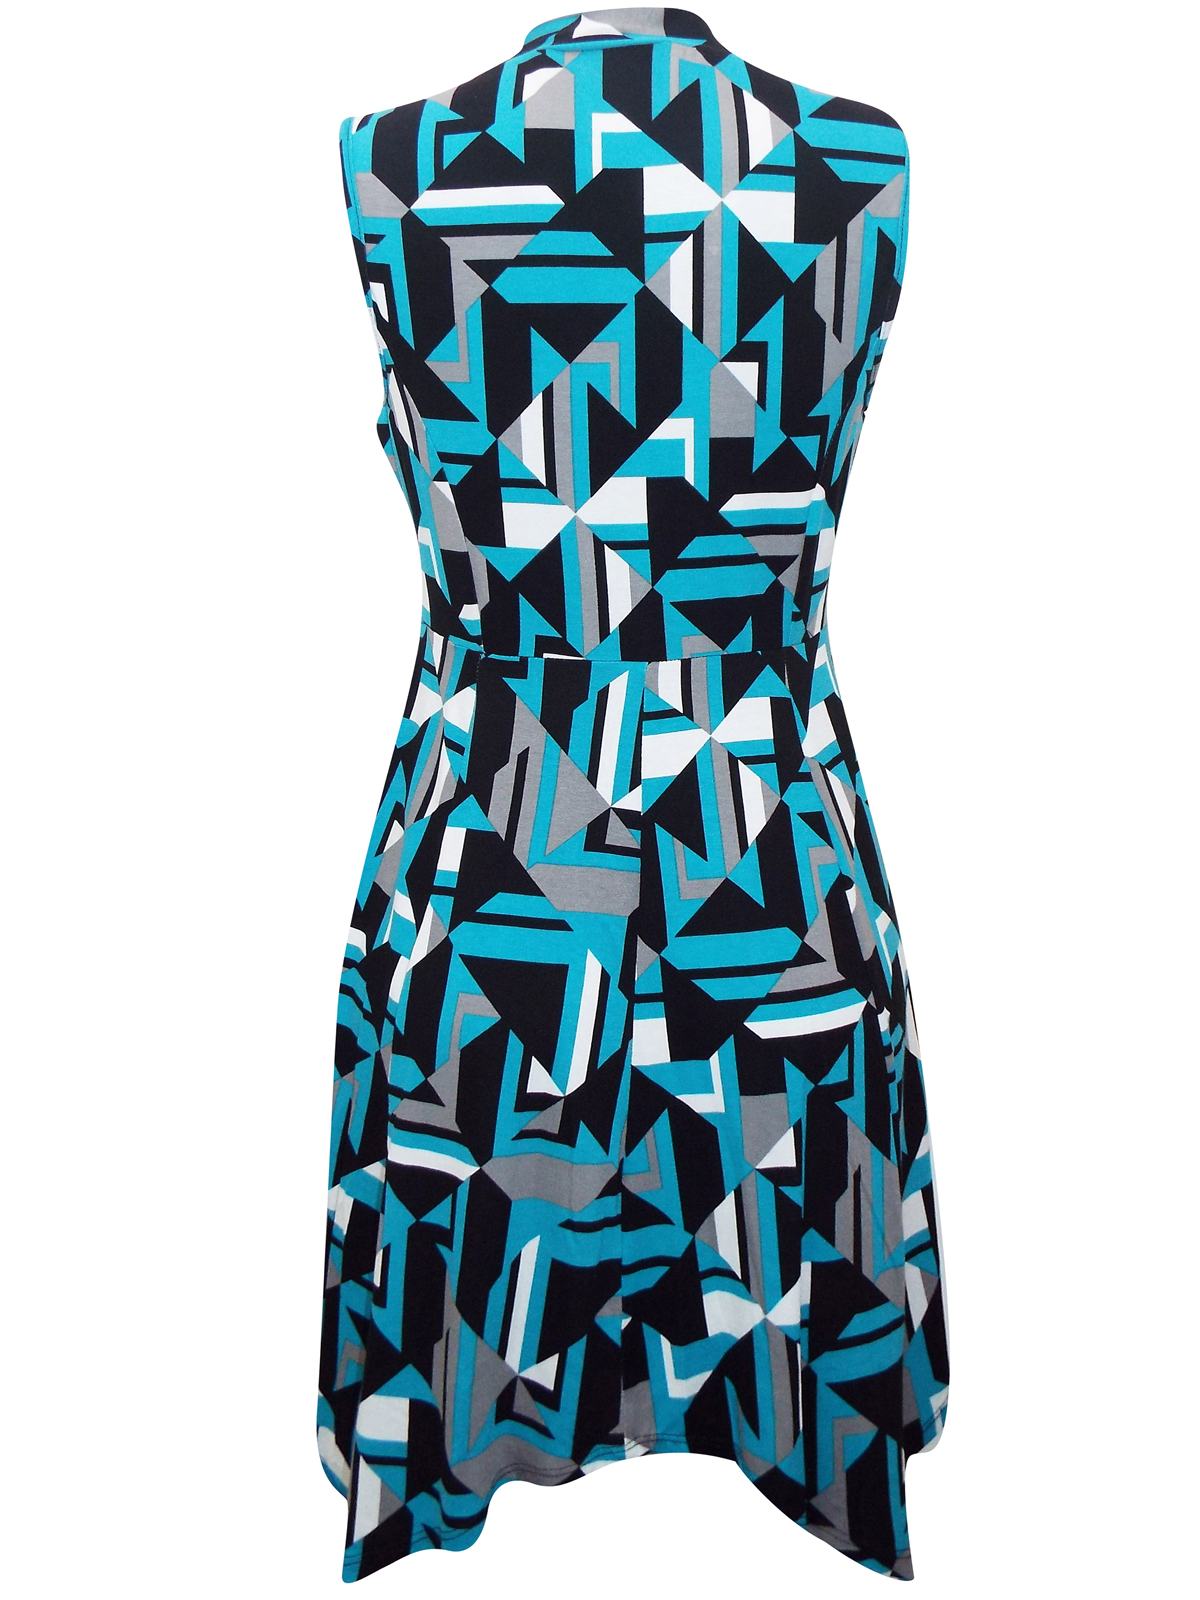 TURQUOISE High Neck Geo Printed Jersey Dress - Size 8 to 22